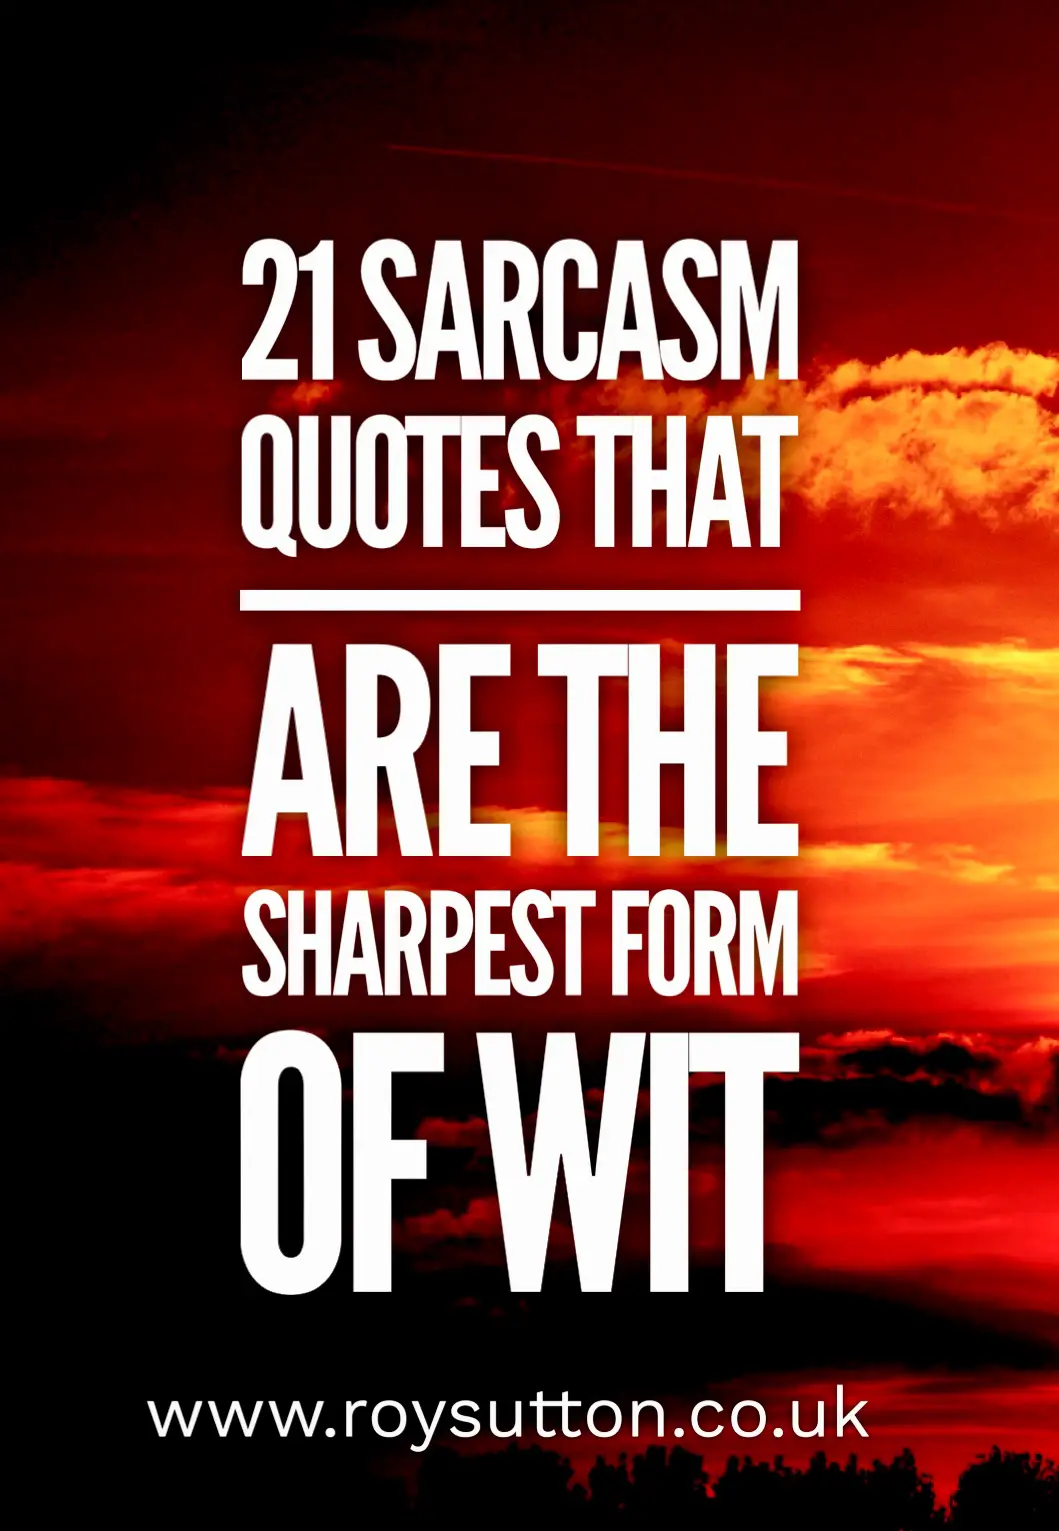 21 sarcasm quotes that are the sharpest form of wit - Roy Sutton